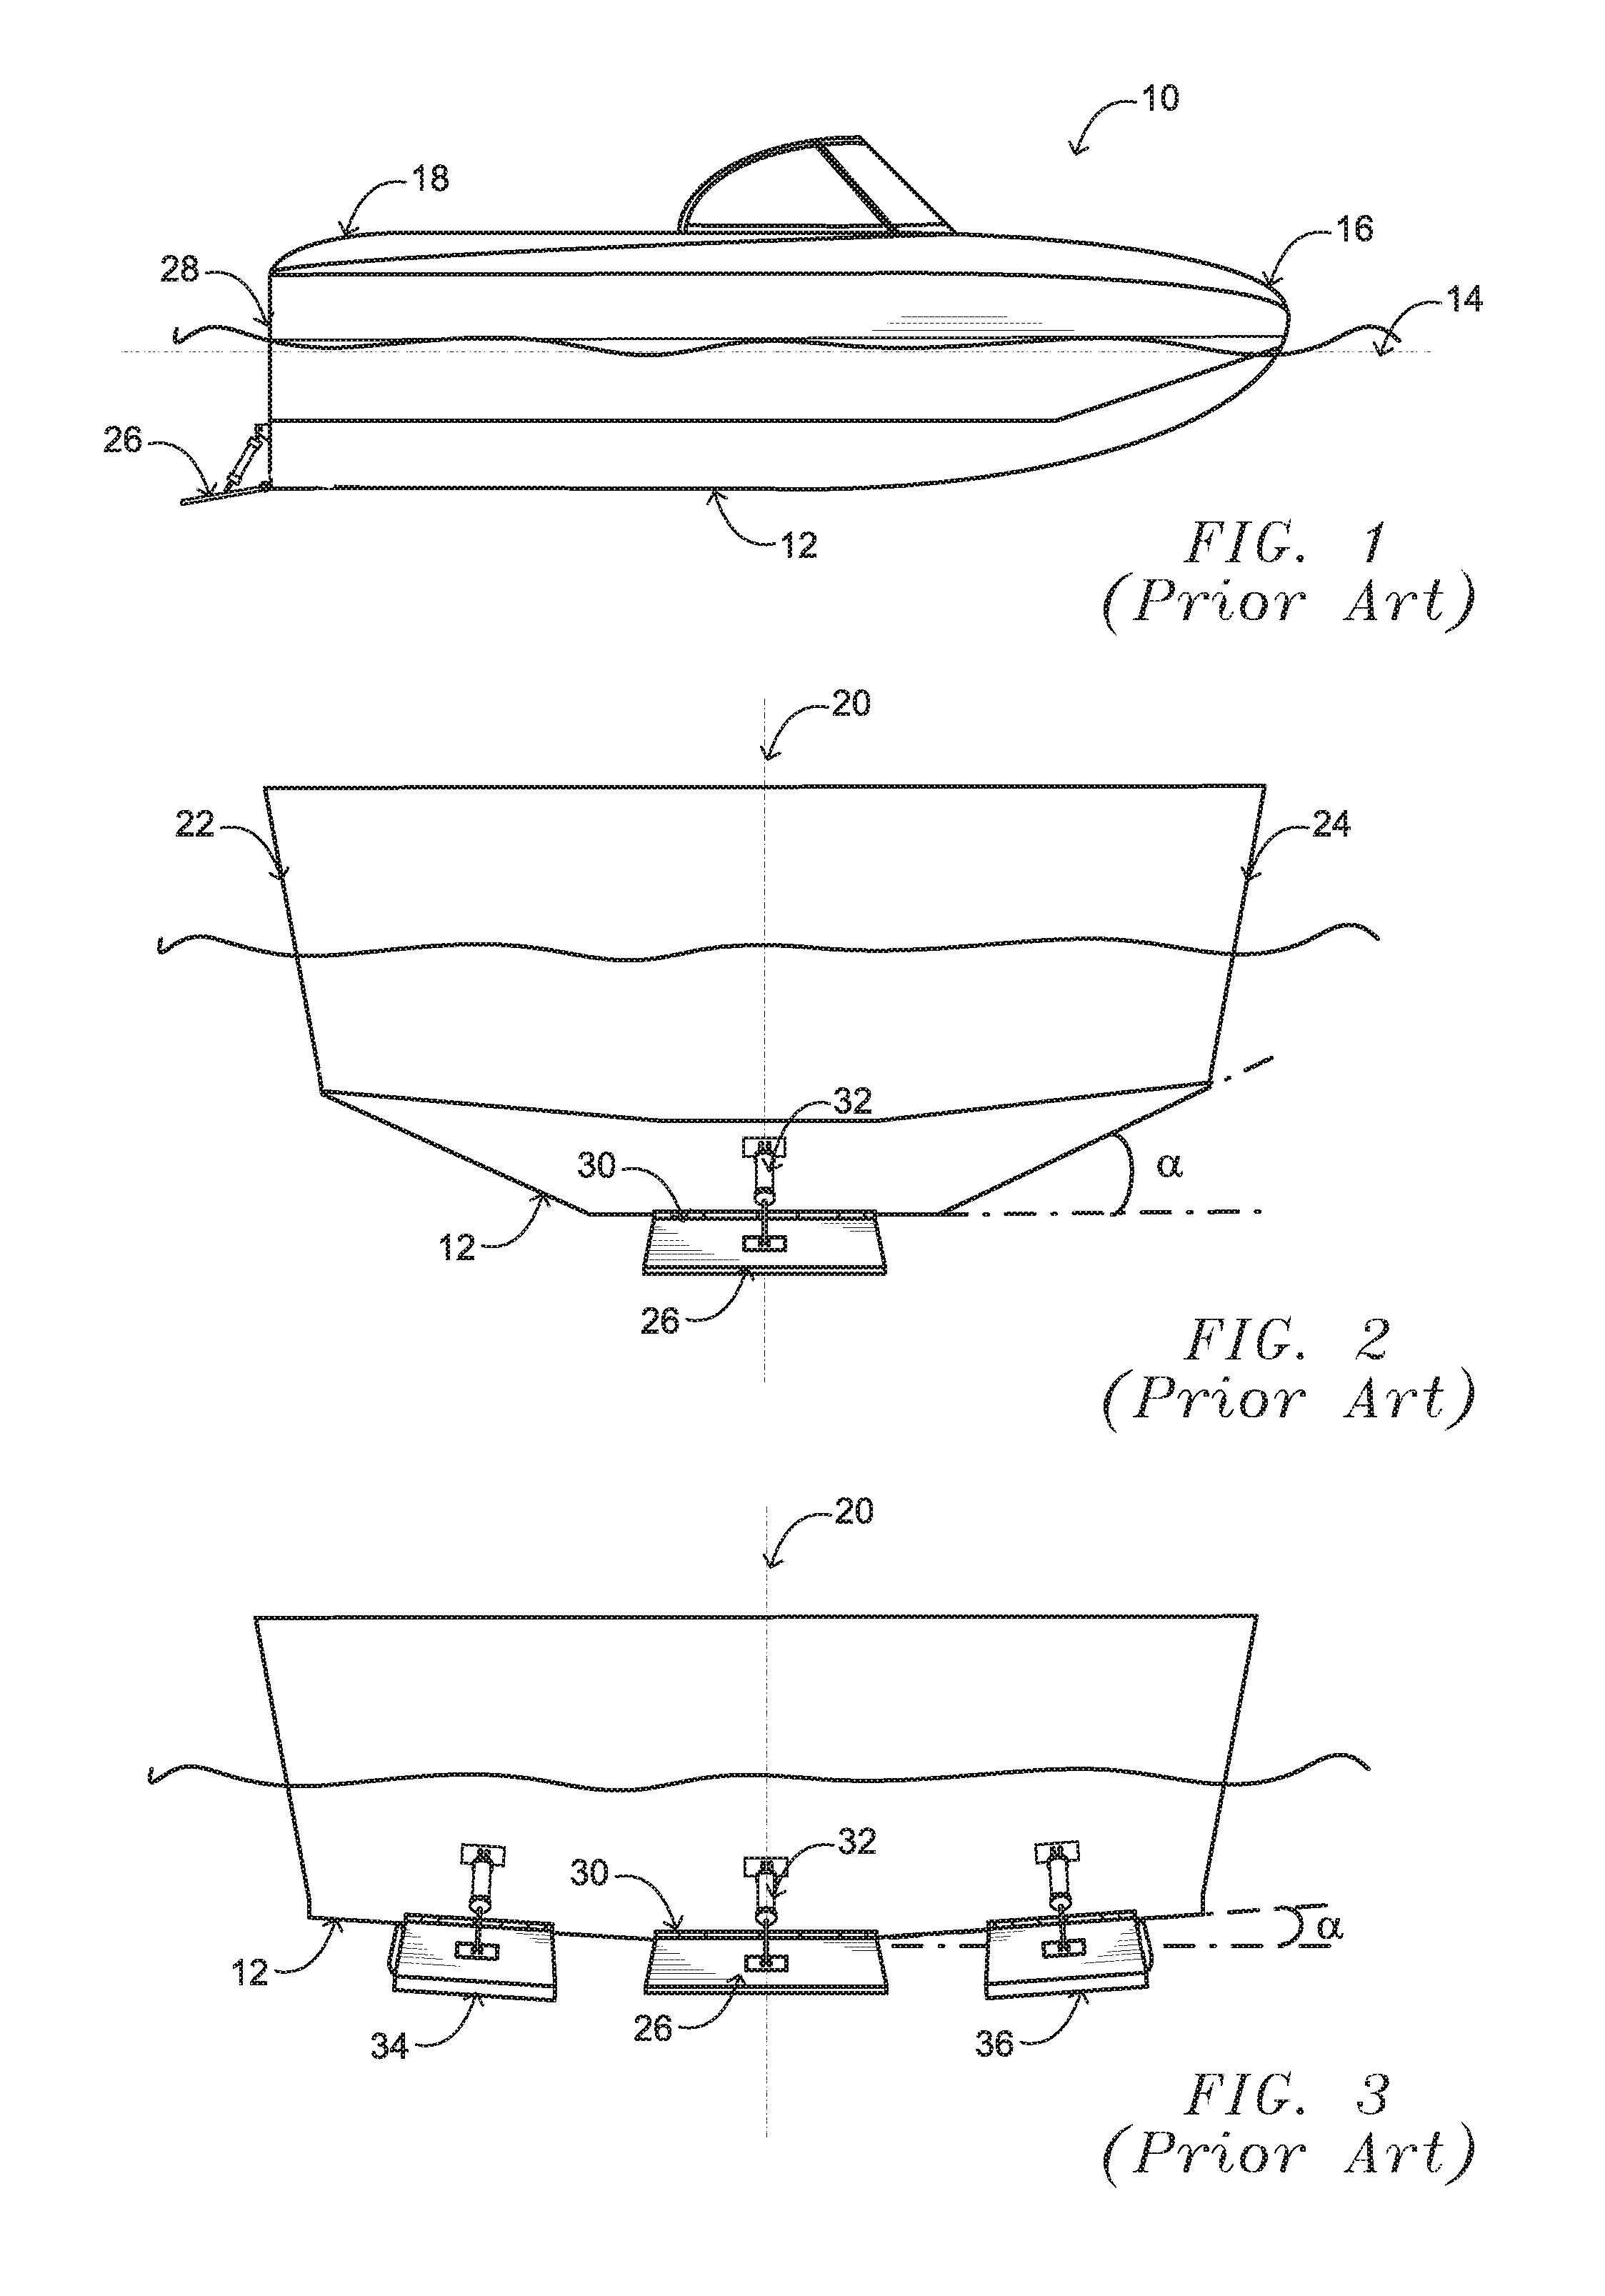 Boat and improved wake-modifying device for manipulating the size and shape of the wake